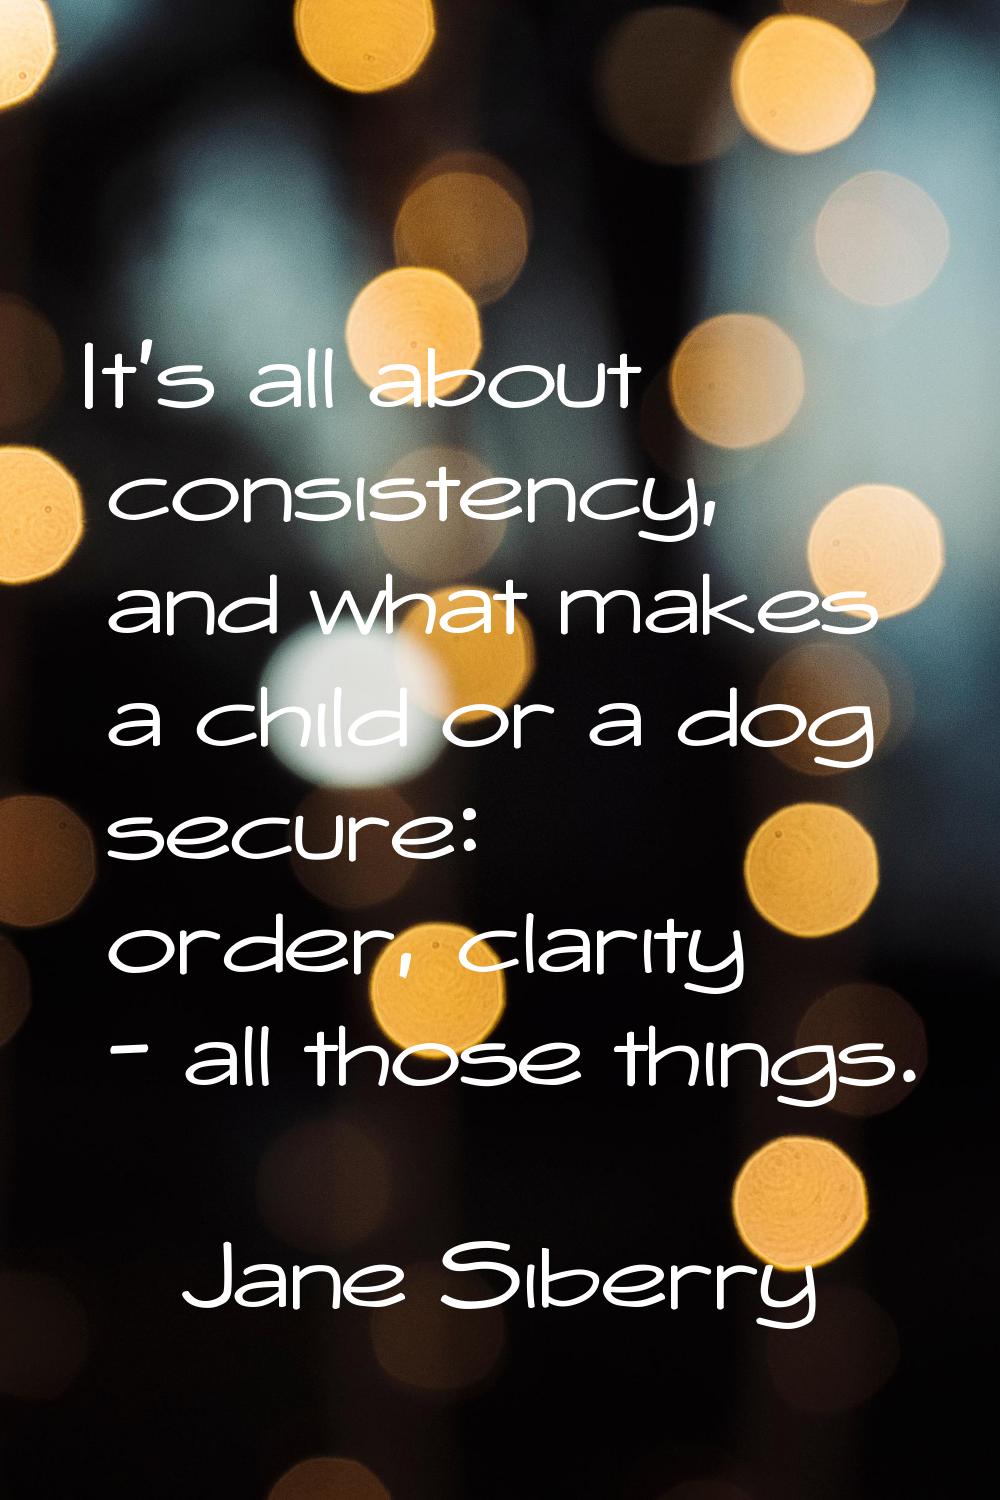 It's all about consistency, and what makes a child or a dog secure: order, clarity - all those thin